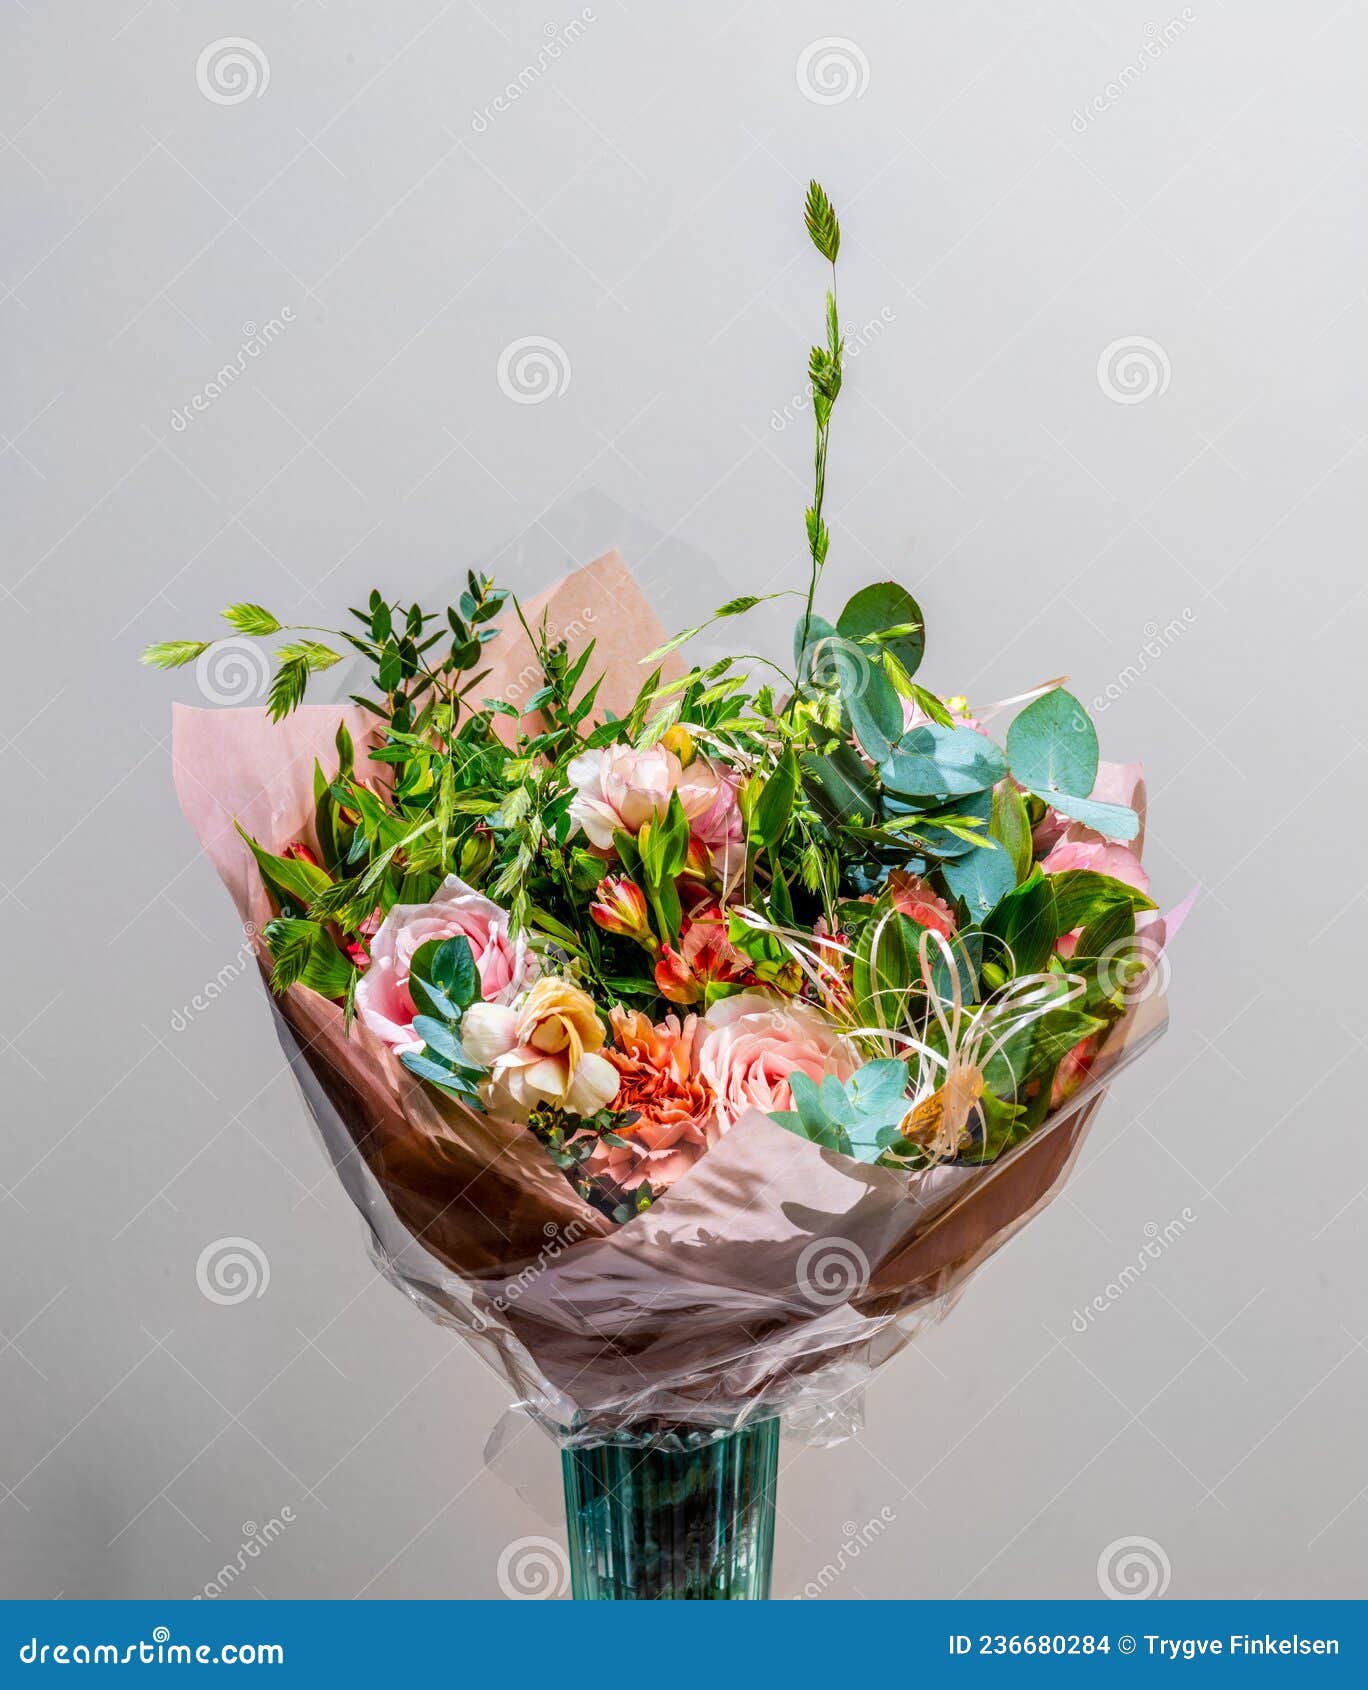 a colorful bouquet with roses and other flowers..